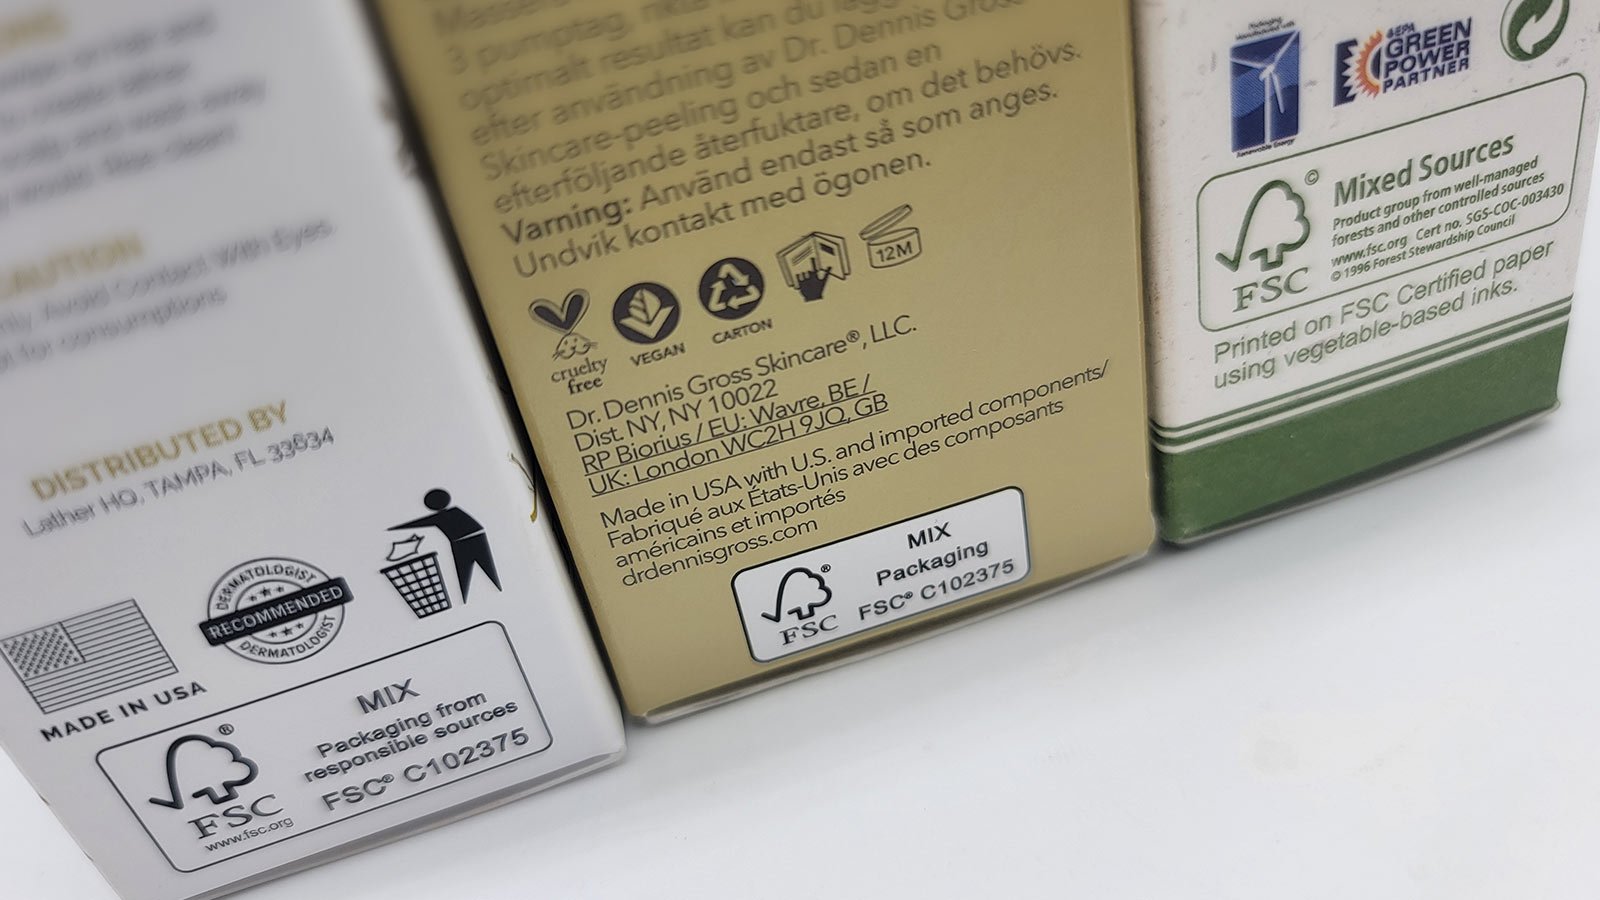 upclose of packaging showing substainable logos